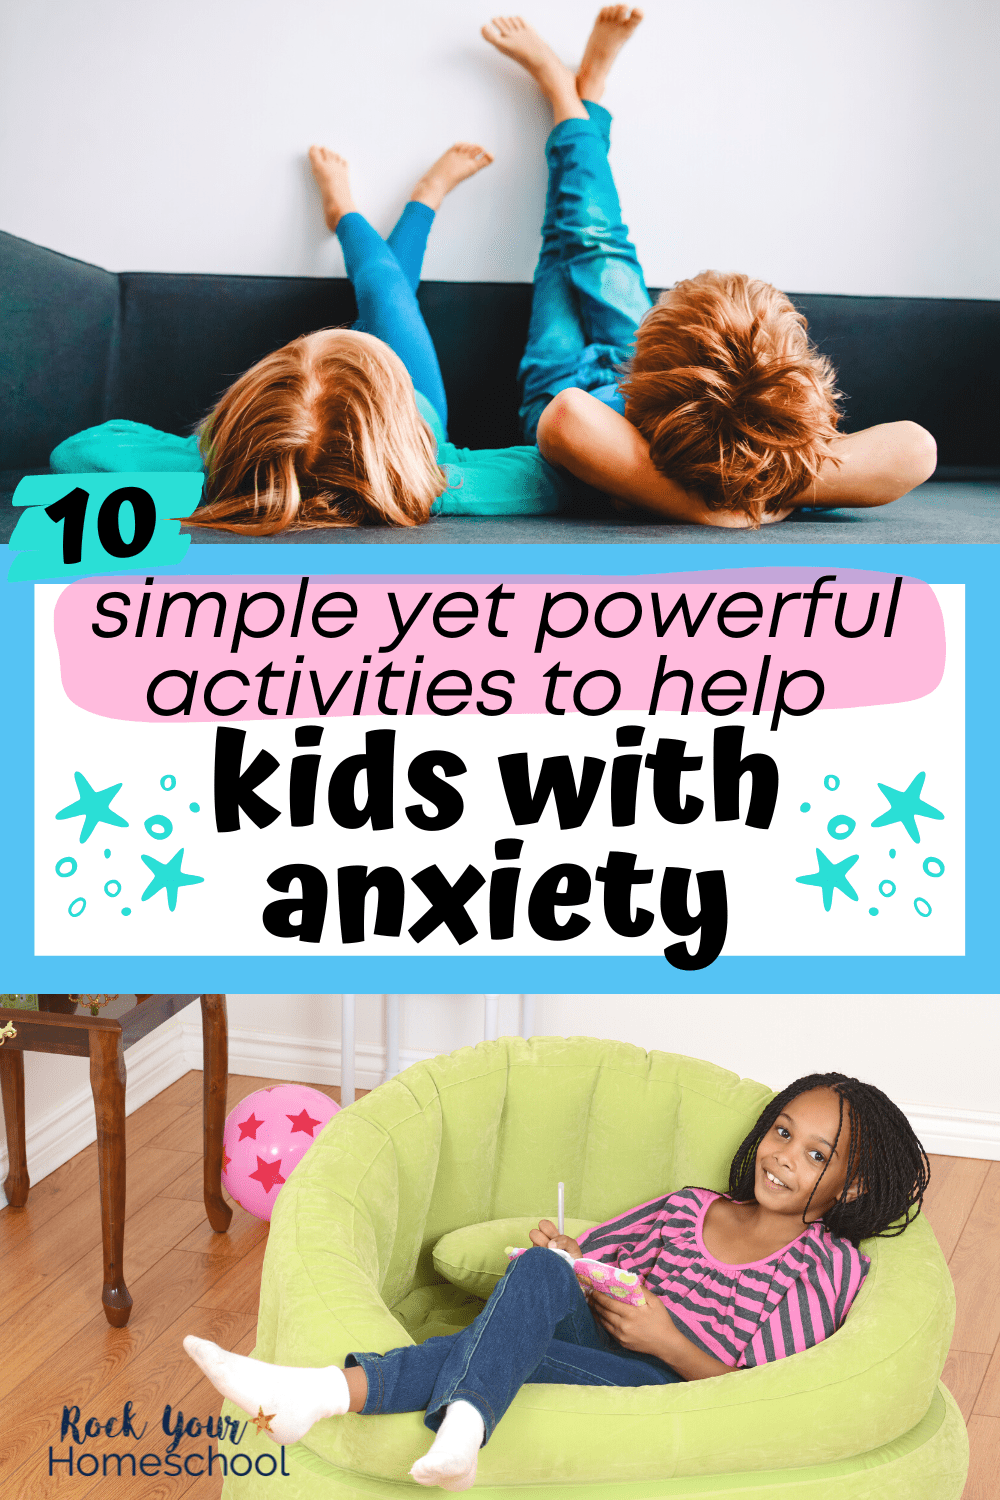 10 Simple Yet Powerful Activities to Help Kids with Anxiety